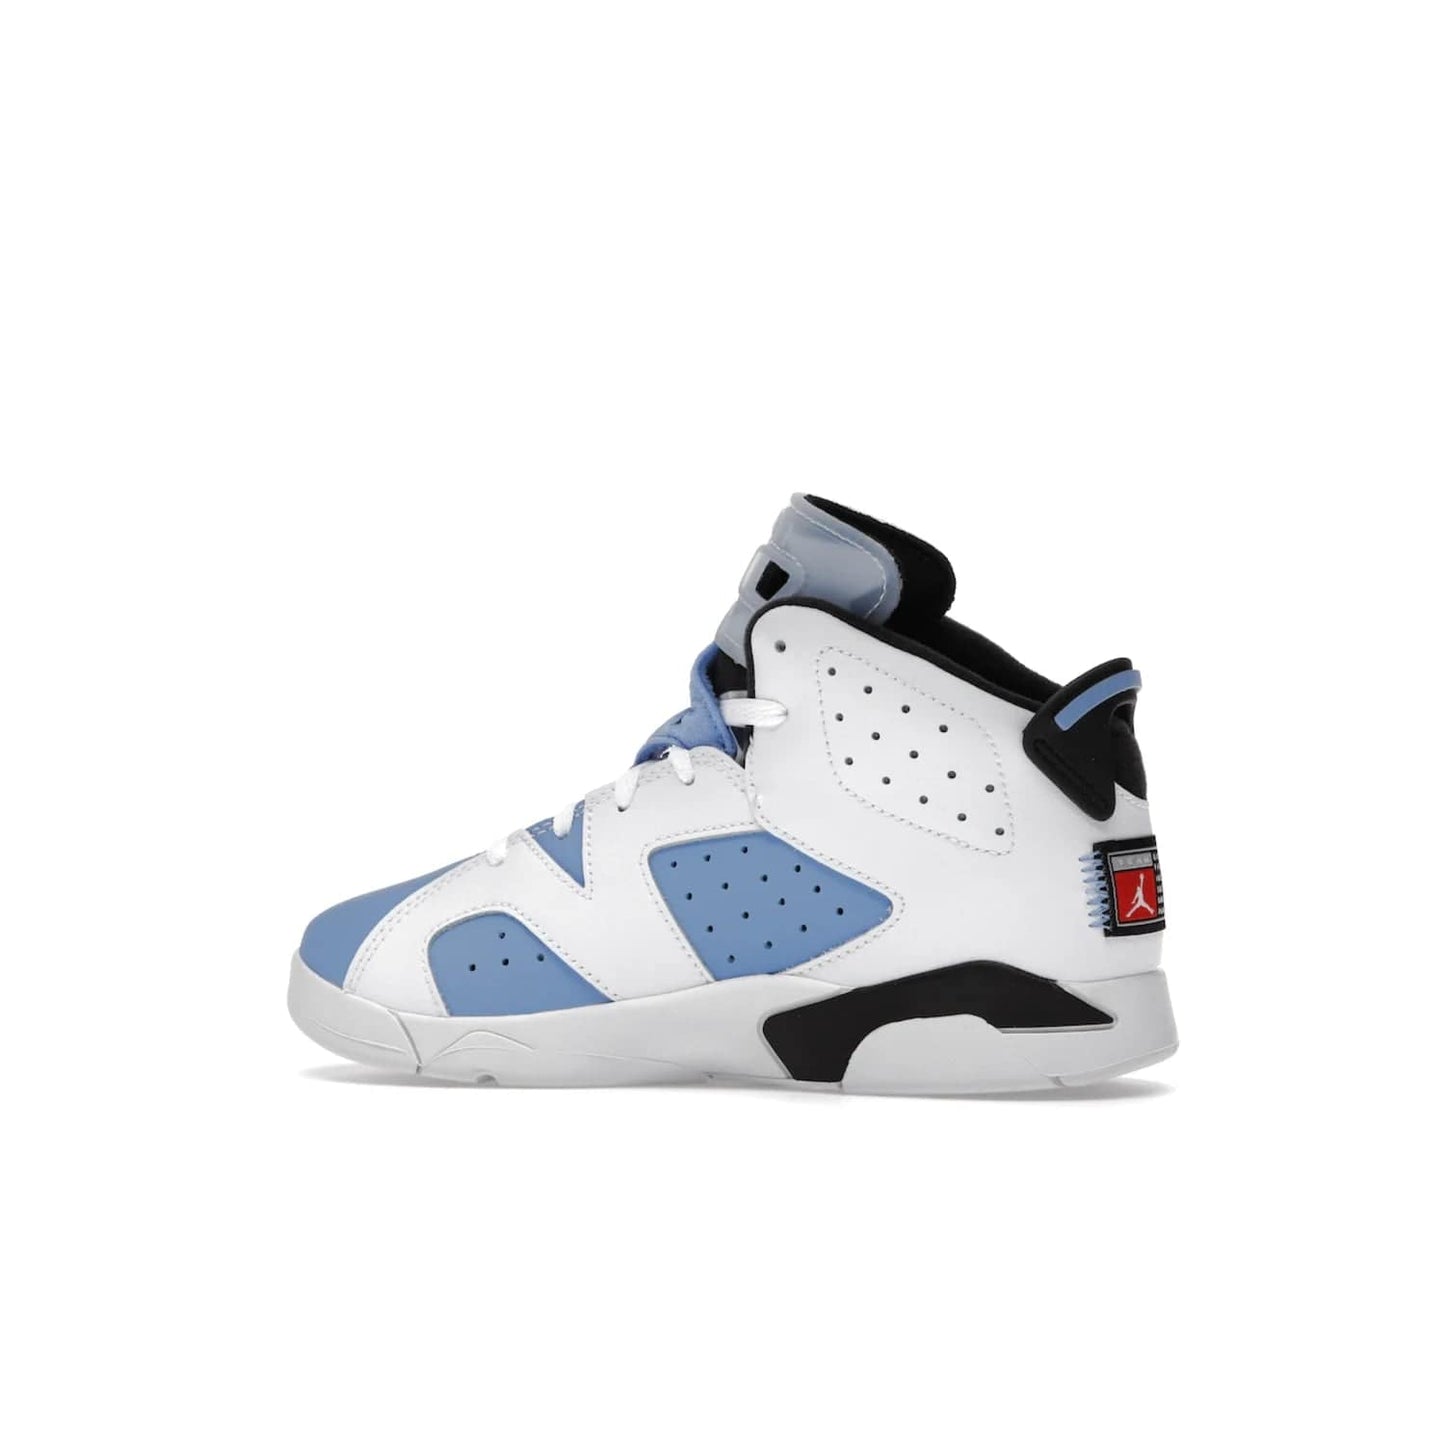 Jordan 6 Retro UNC White (PS) - Image 21 - Only at www.BallersClubKickz.com - The Air Jordan 6 Retro UNC White PS celebrates Michael Jordan's alma mater, the University of North Carolina. It features a classic color-blocking of the iconic Jordan 6 Carmine and a stitched Jordan Team patch. This must-have sneaker released on April 27th, 2022. Referencing the university colors, get this shoe for a stylish and timeless style with university pride.